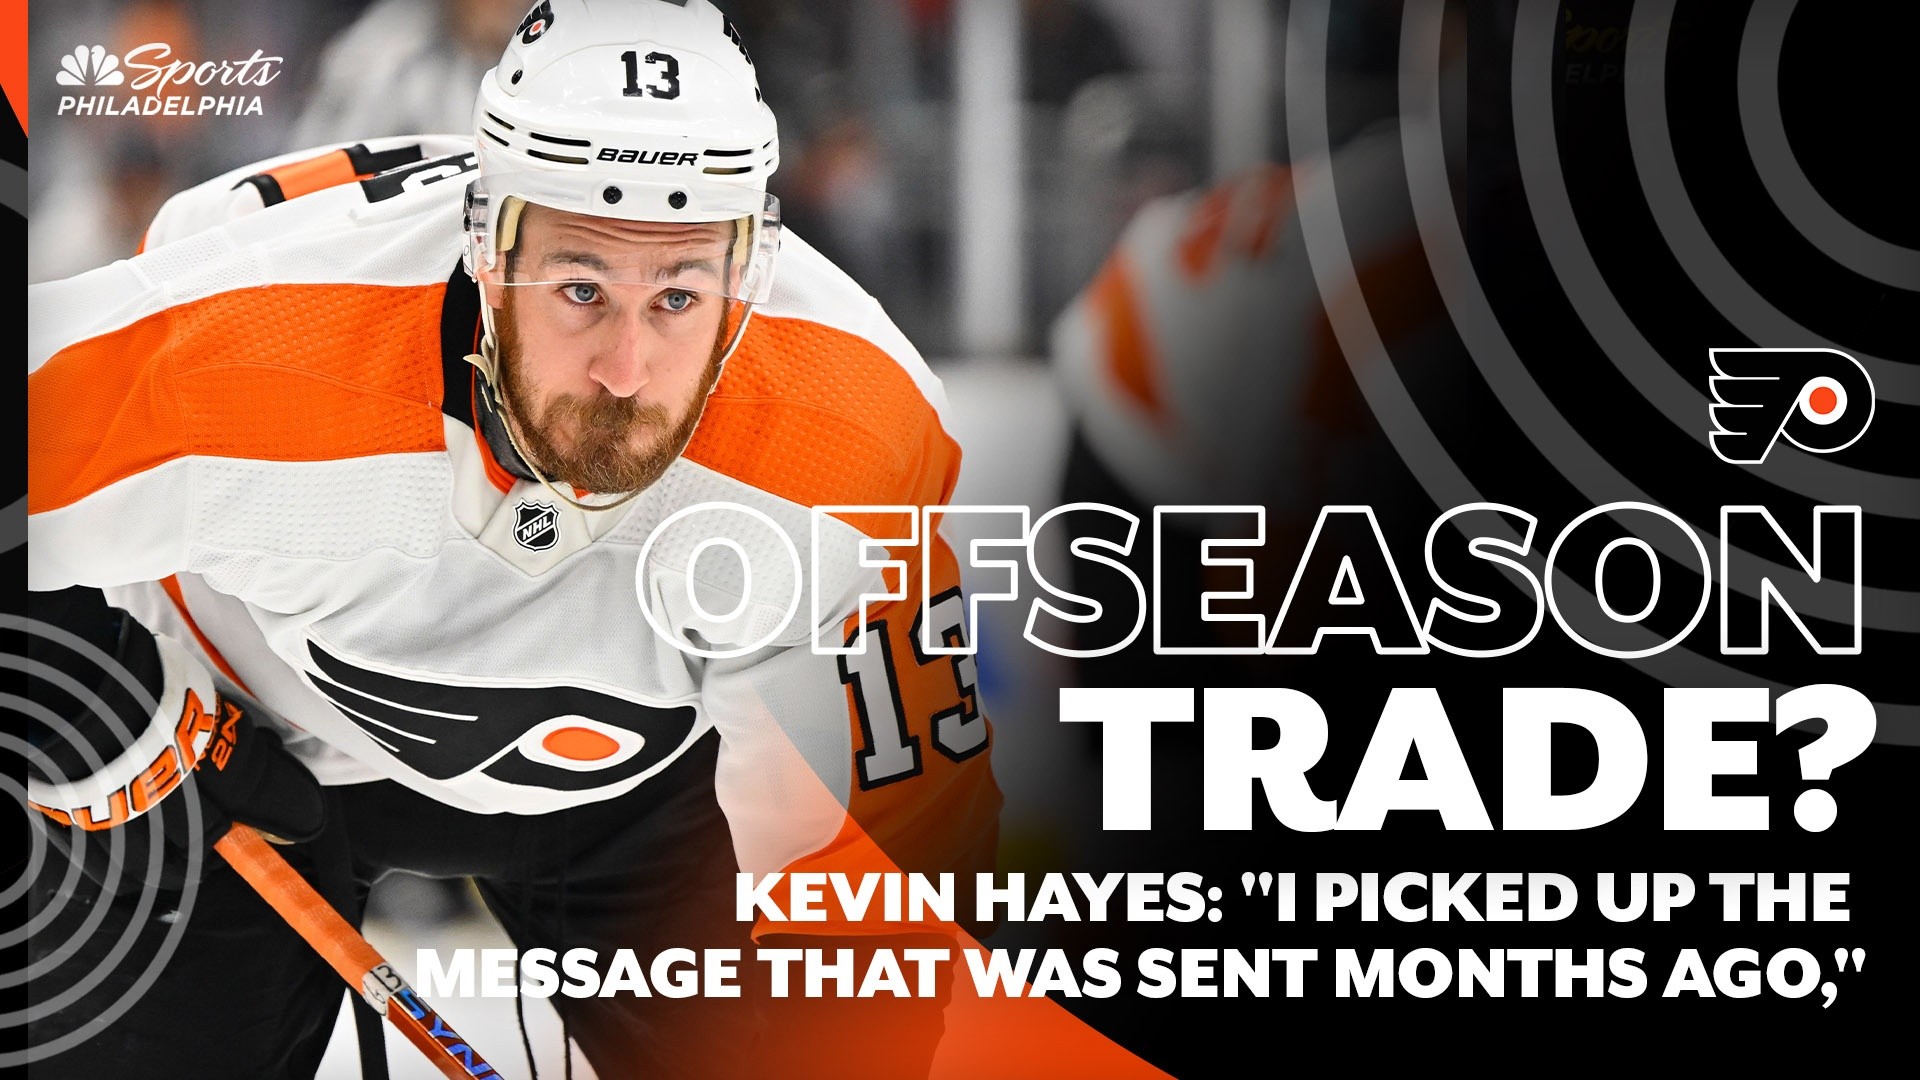 Offseason trade? Kevin Hayes picked up the message from Flyers